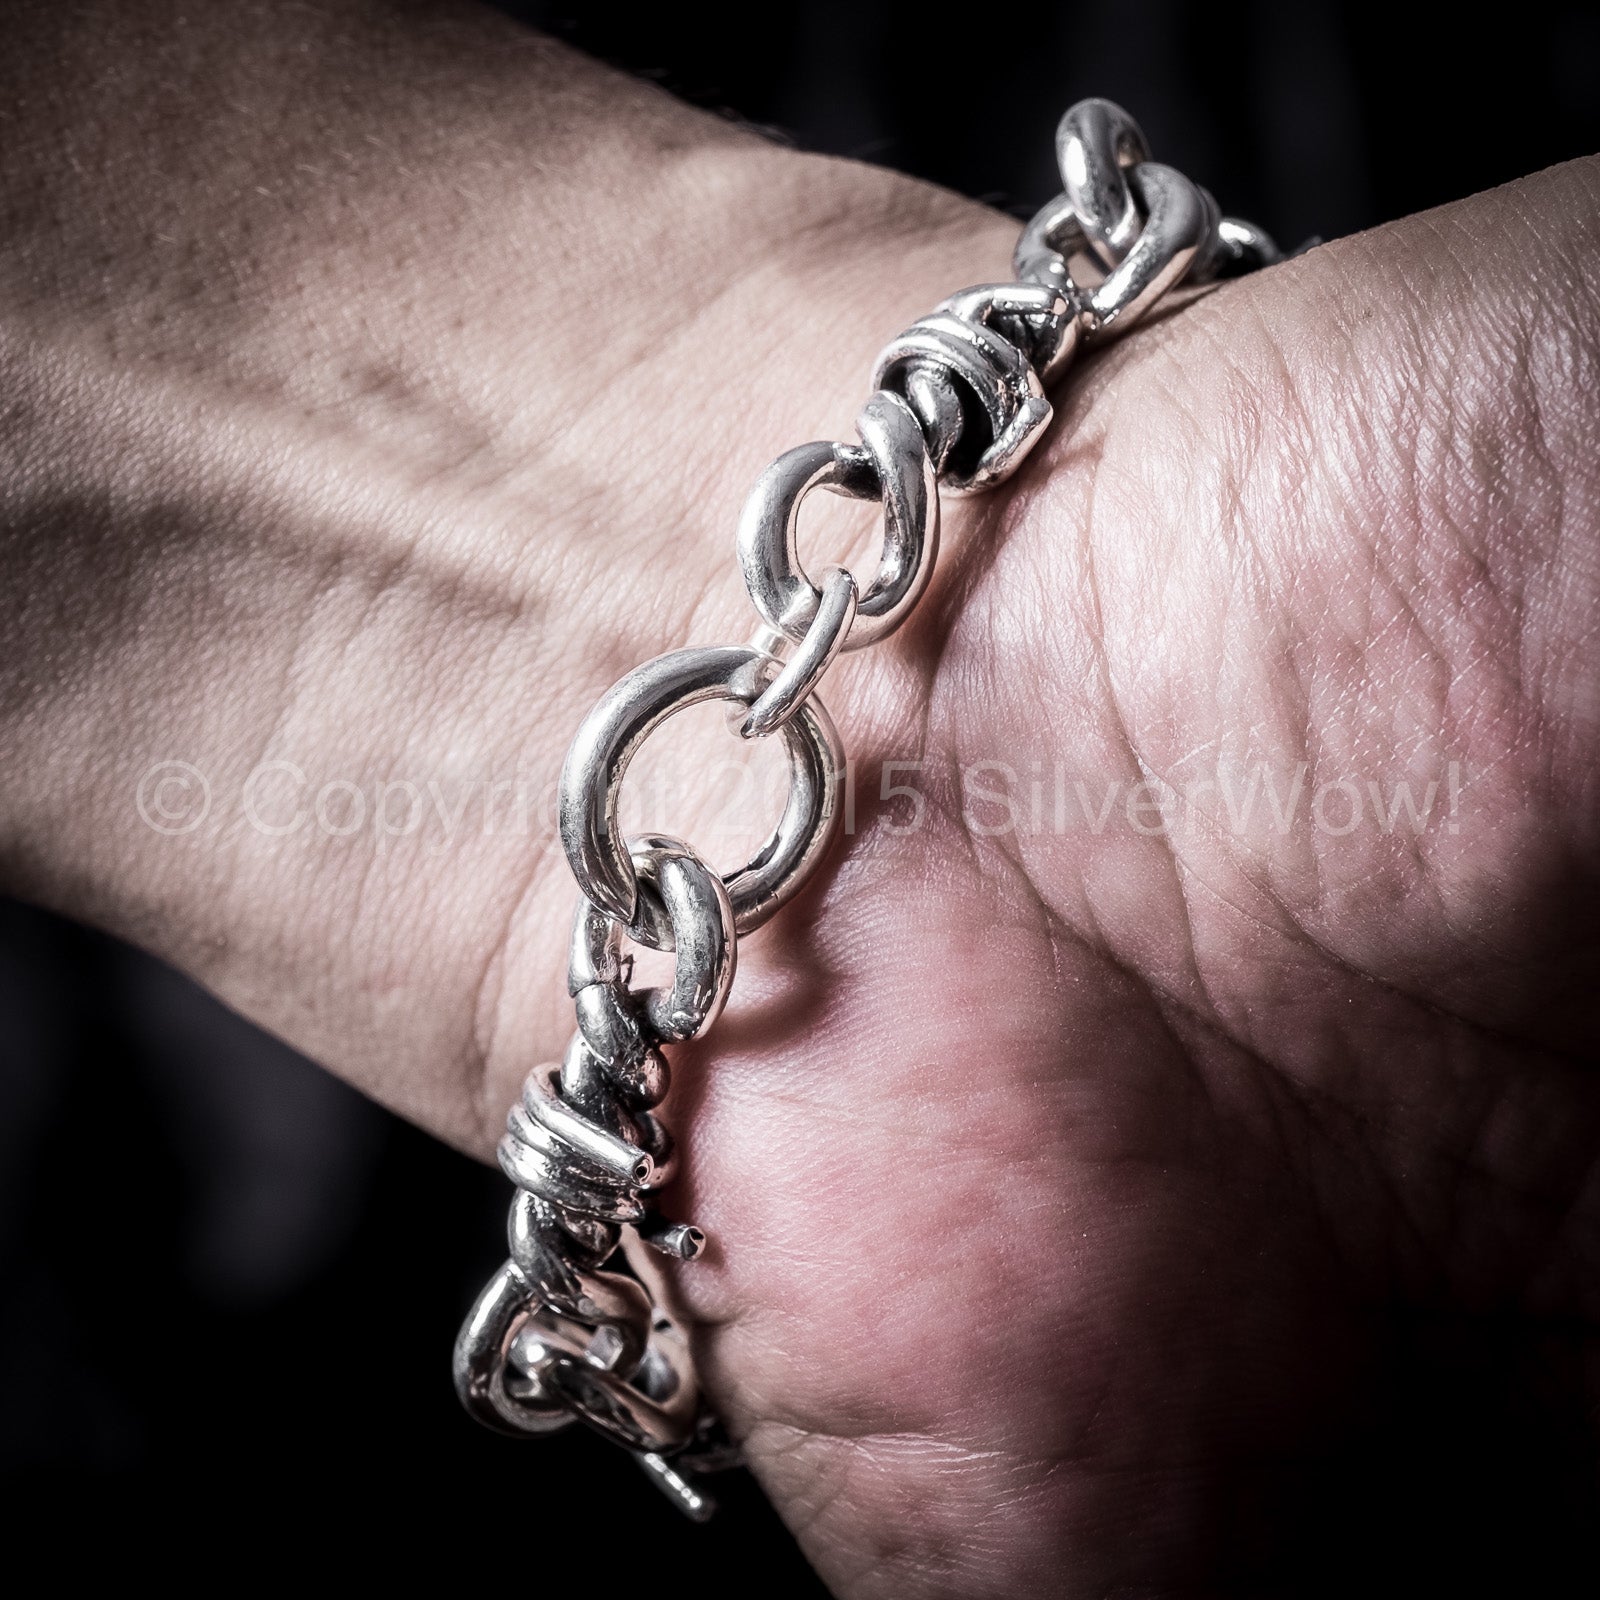 Barb Wire Bracelet - Sterling Silver. Totally Unique | Silverwow